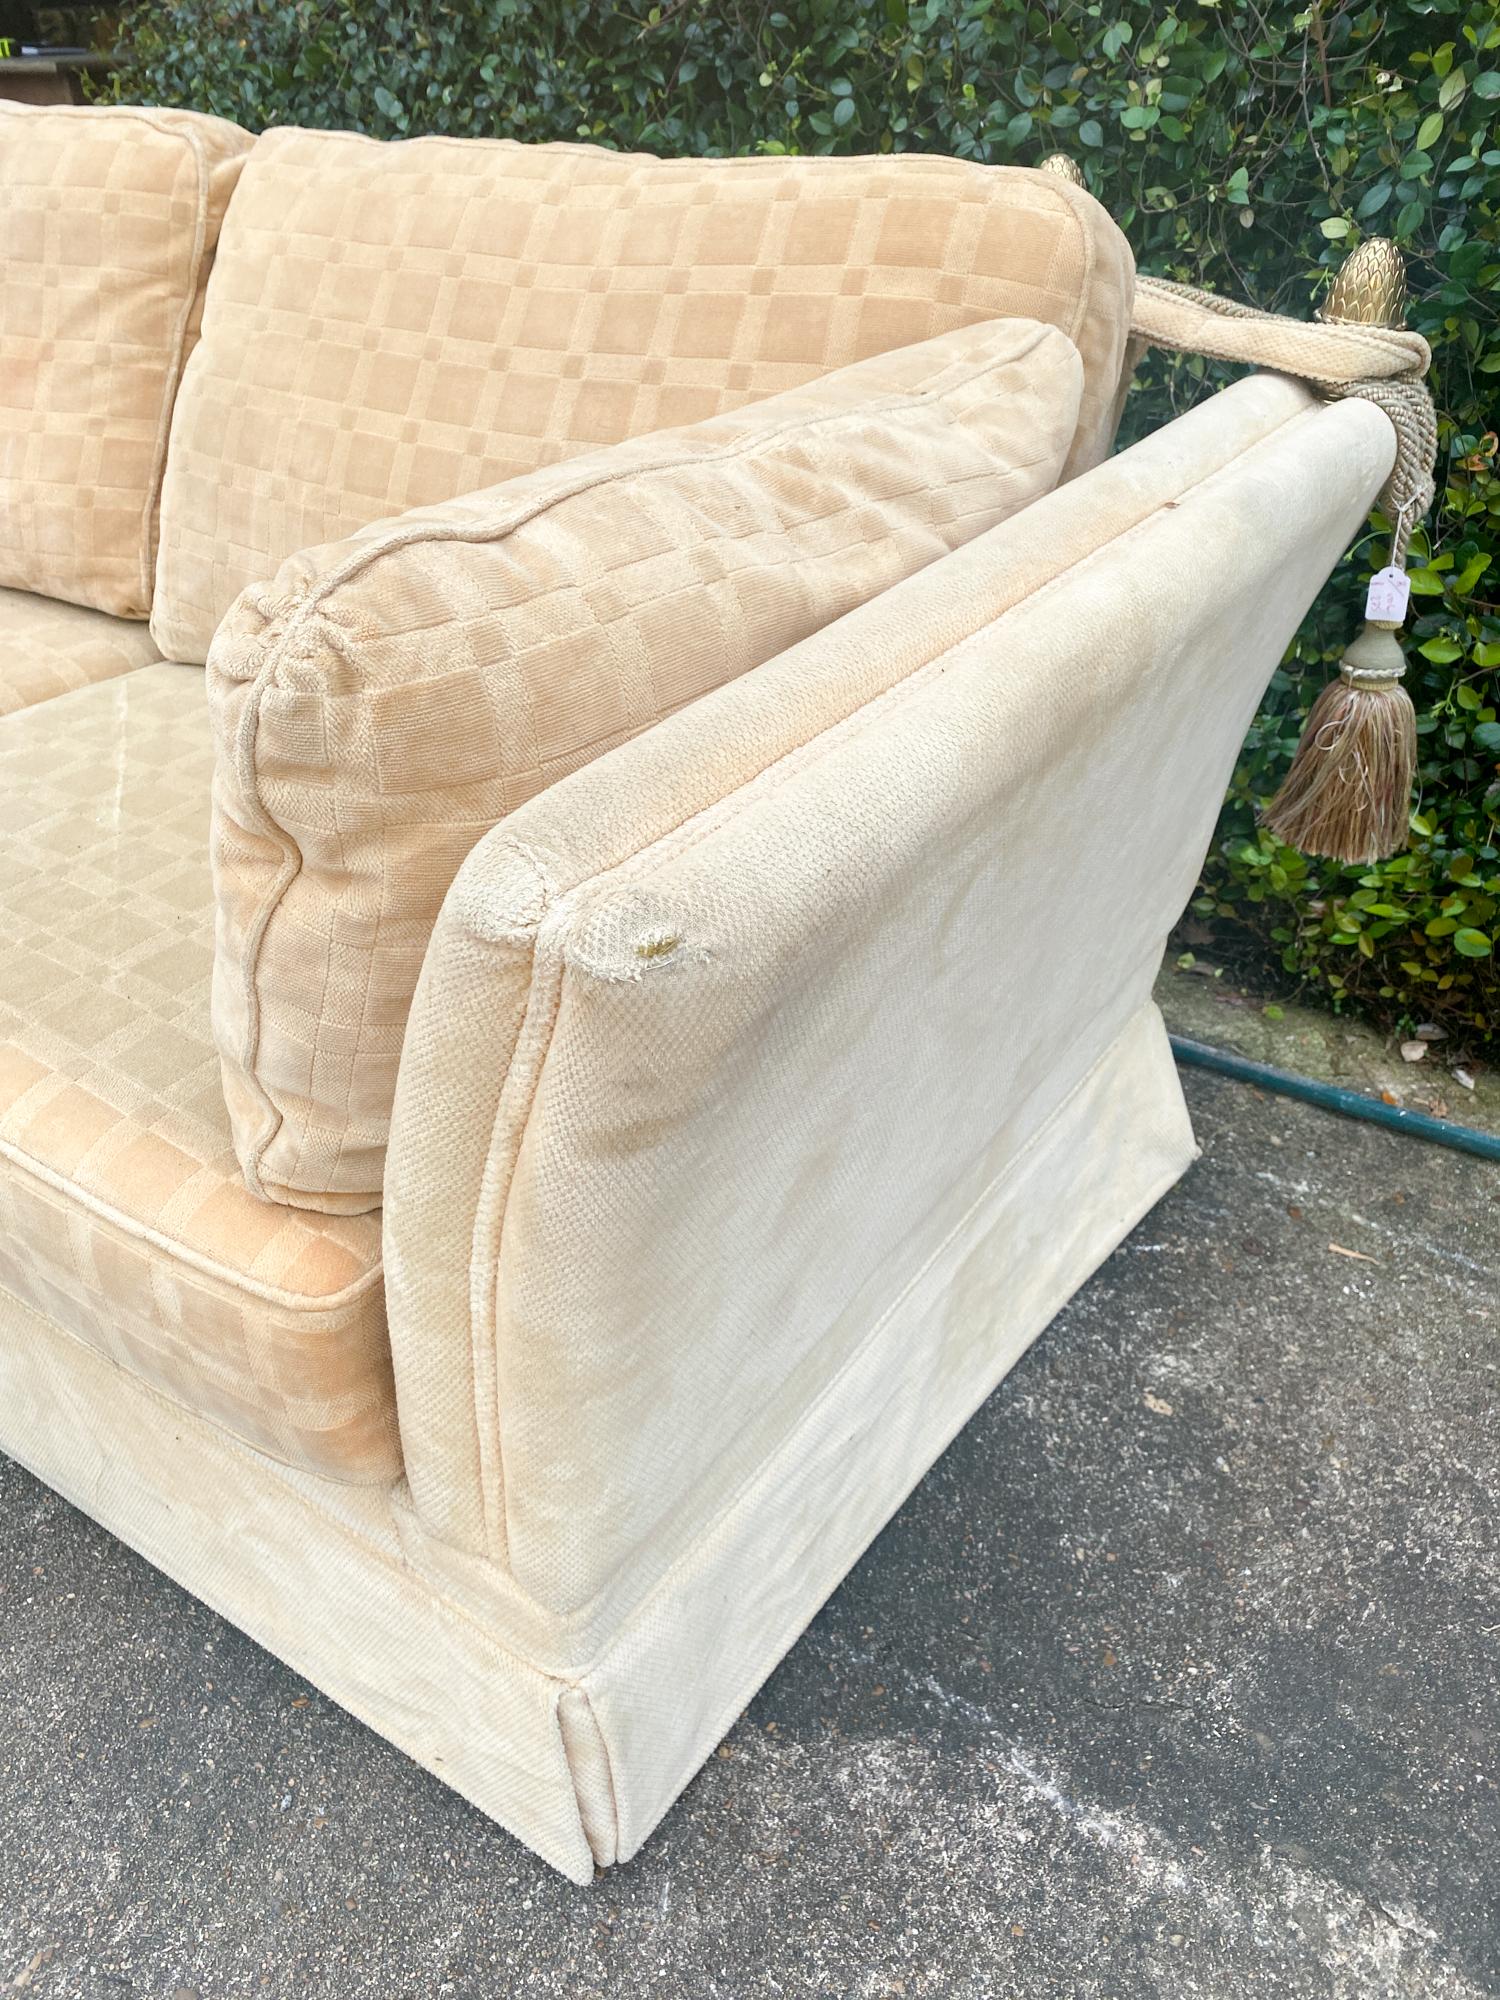 Late 20th Century Vintage French Ivory Velvet Canapé Sofa with Adjustable Arms and Brass Finials